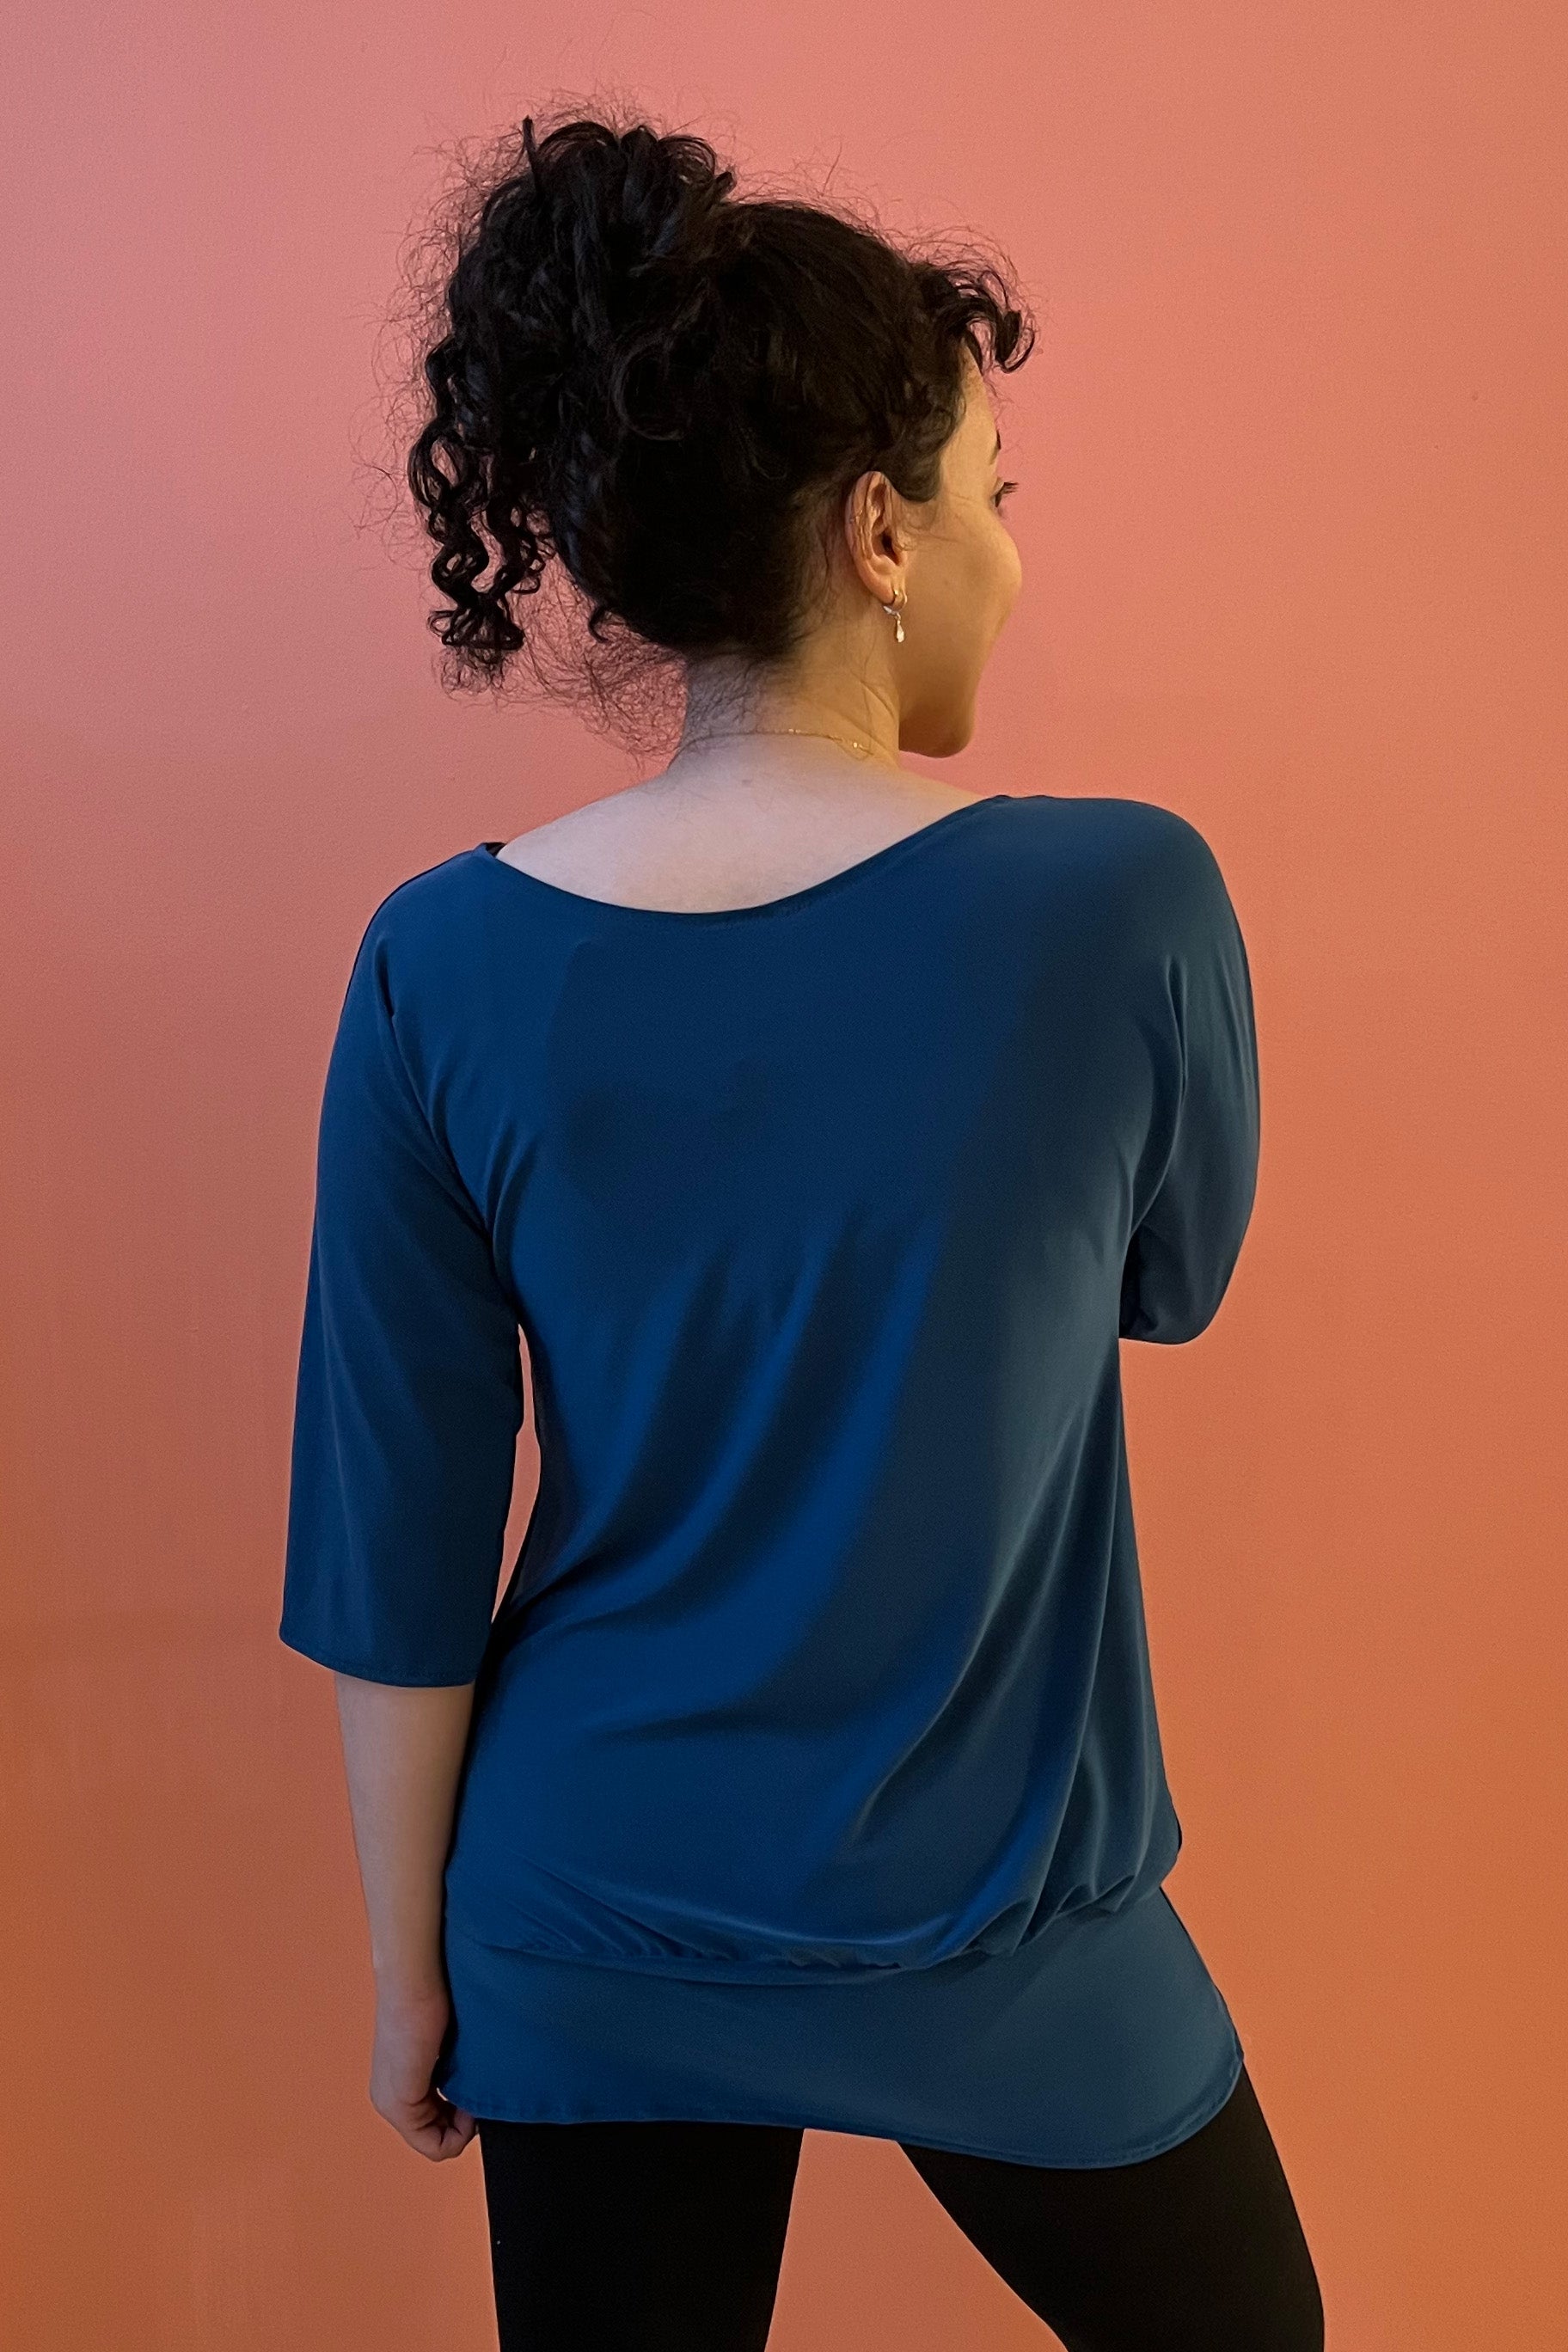 Kafta Top by SI Design, Blue, back view, wide neck, 3/4 sleeves, wide band at hem, sizes XS to XL, made in Quebec